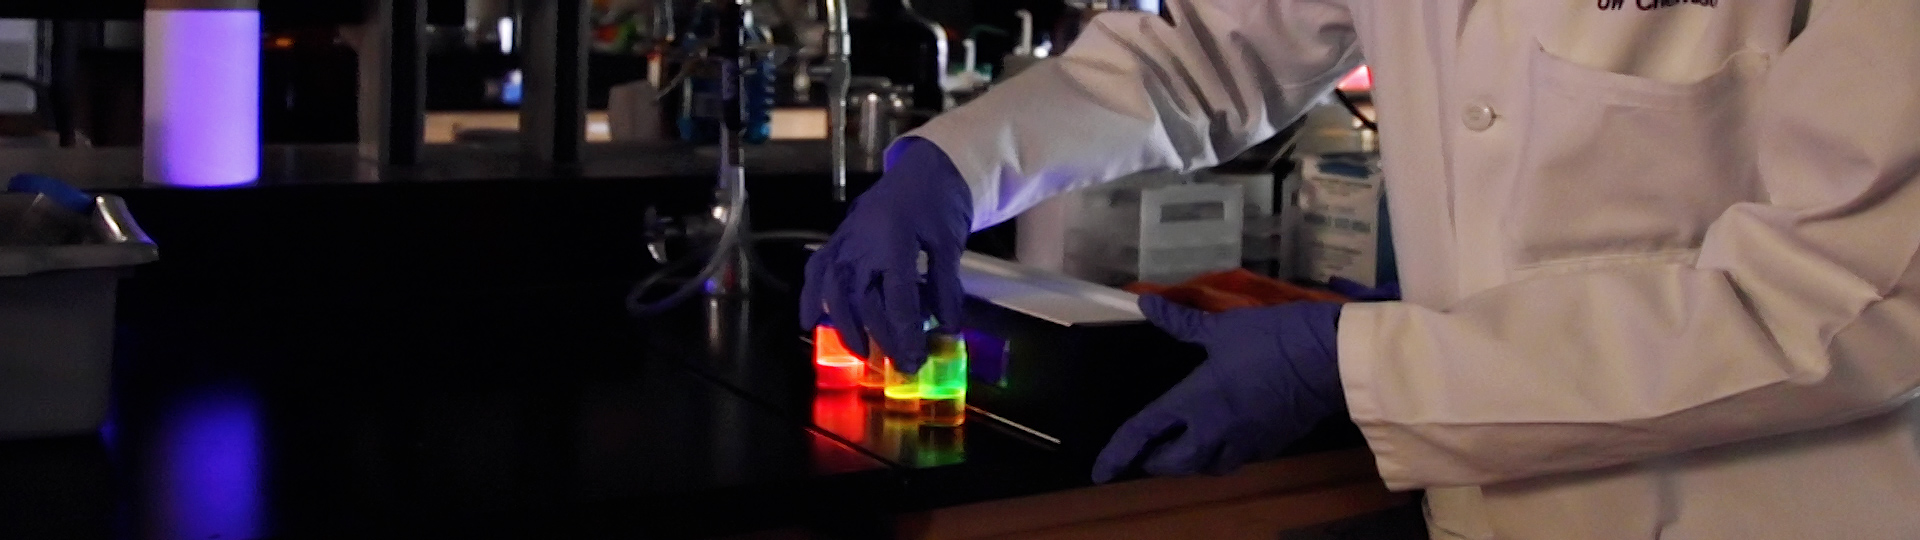 Chemistry student in dark lab with colorful vials lit up by UV light